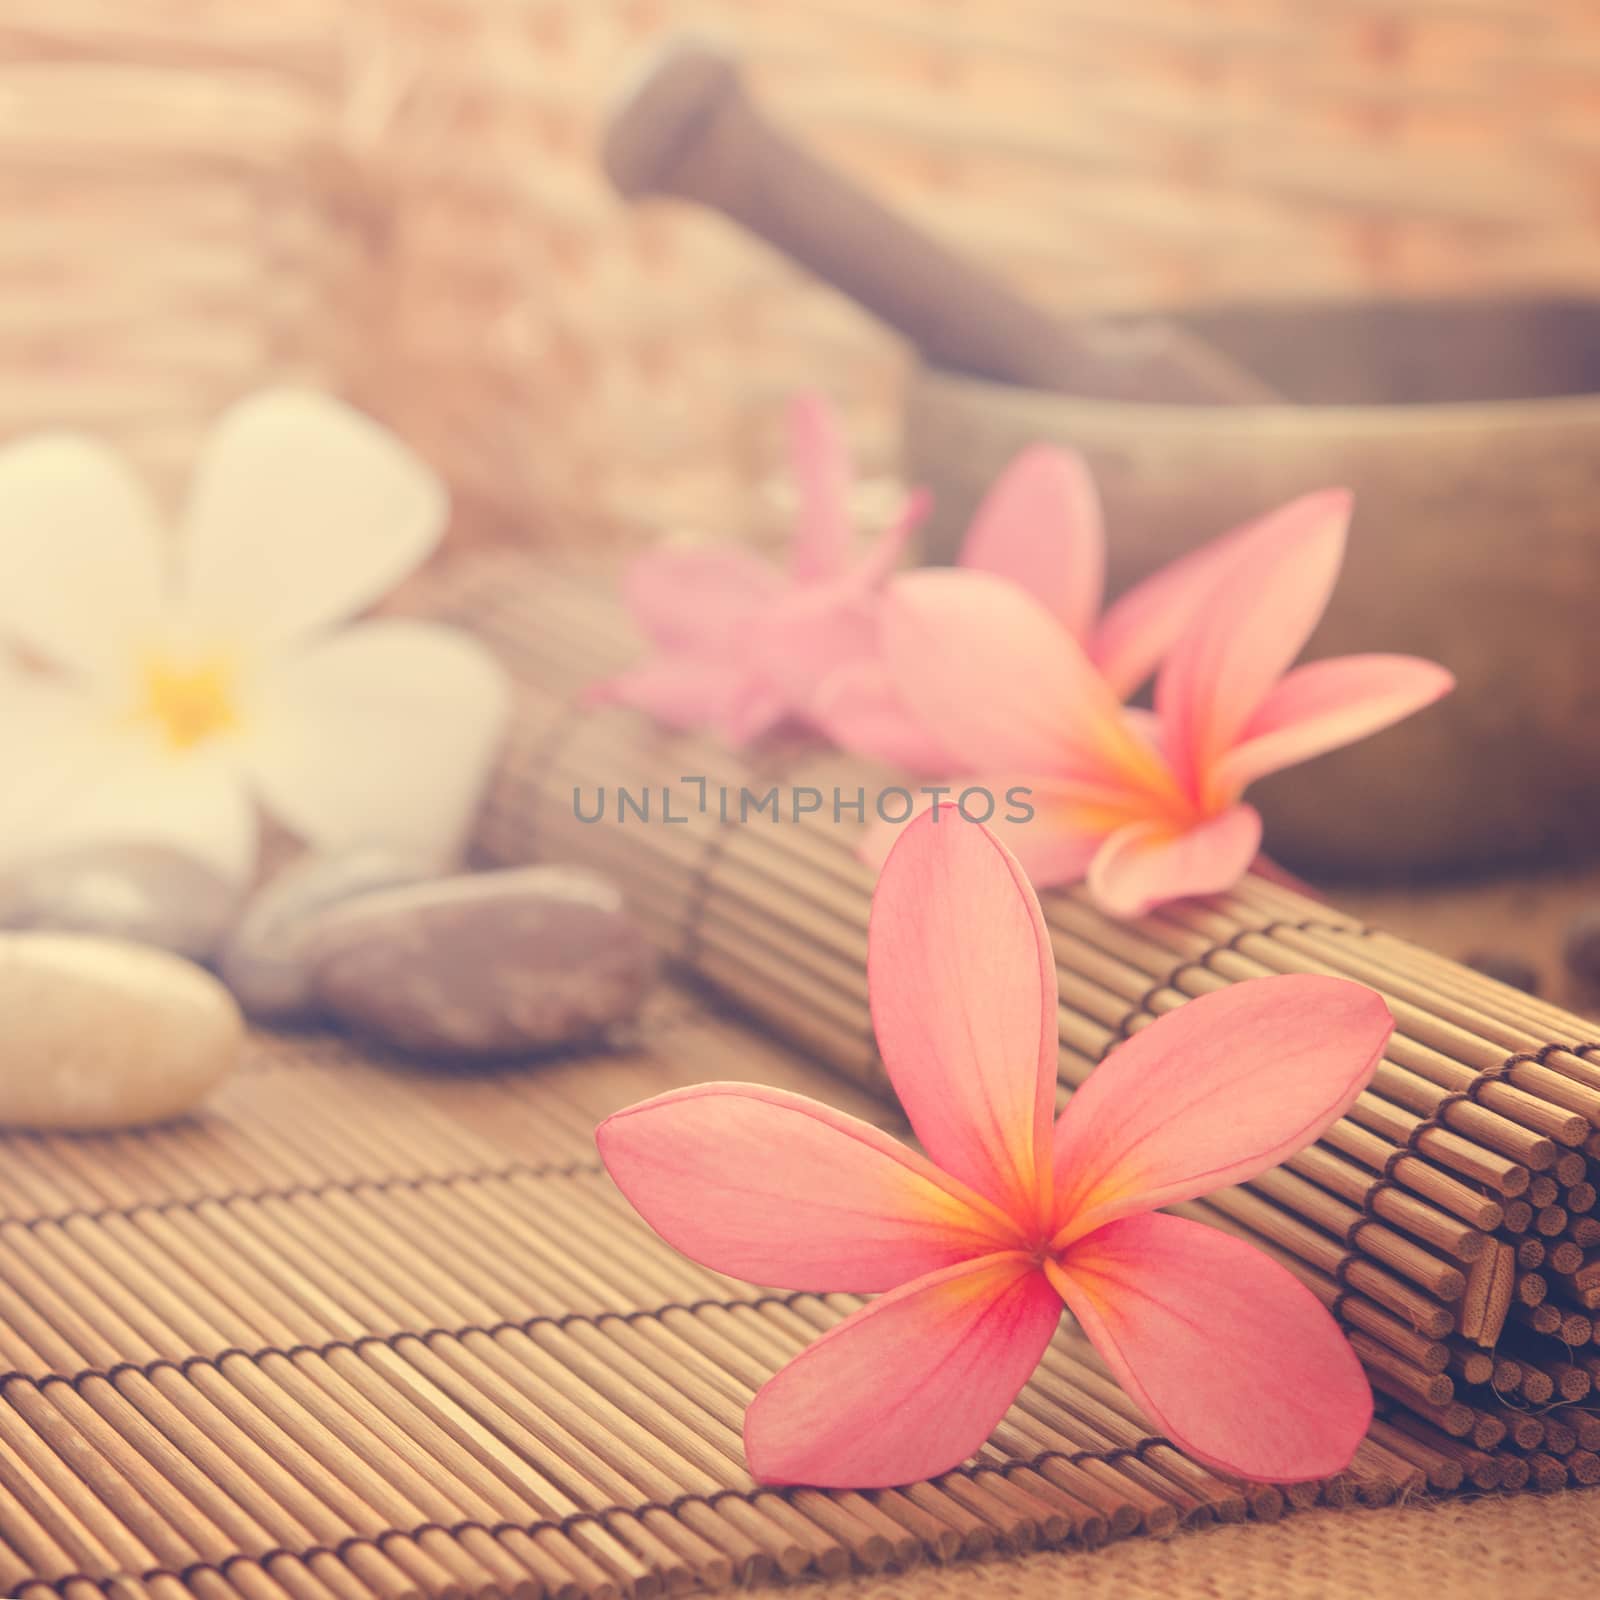 Spa setting, low light with ambient in vintage revival tone. Frangipani, hot and cold stone on bamboo mat.